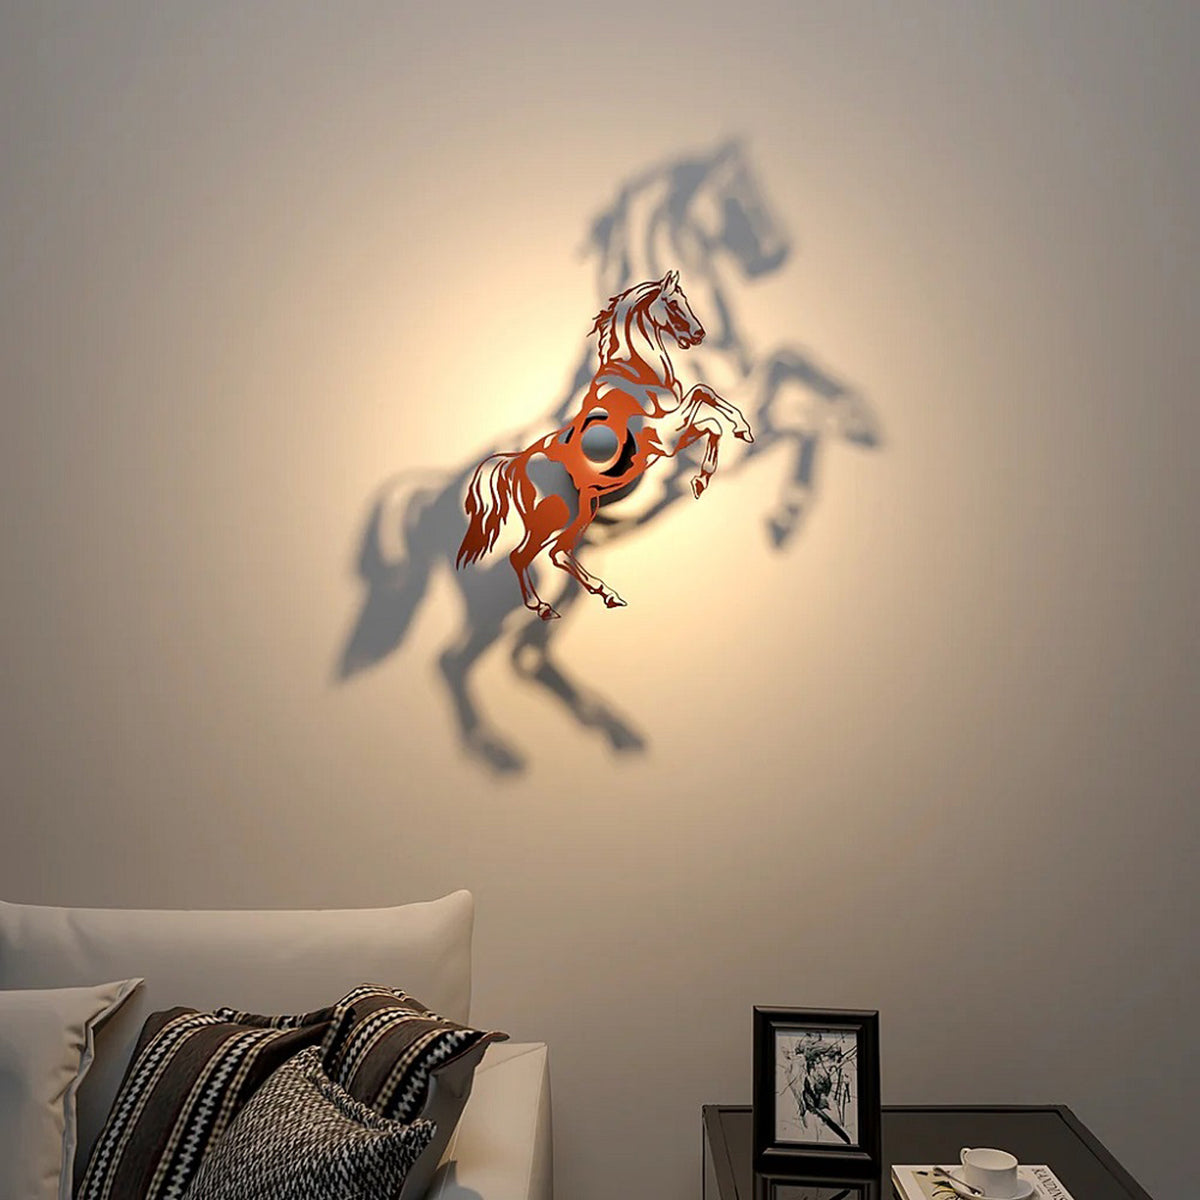 Single Running/ Galloping Horse Shadow Lamp For Home / Office Wall decor